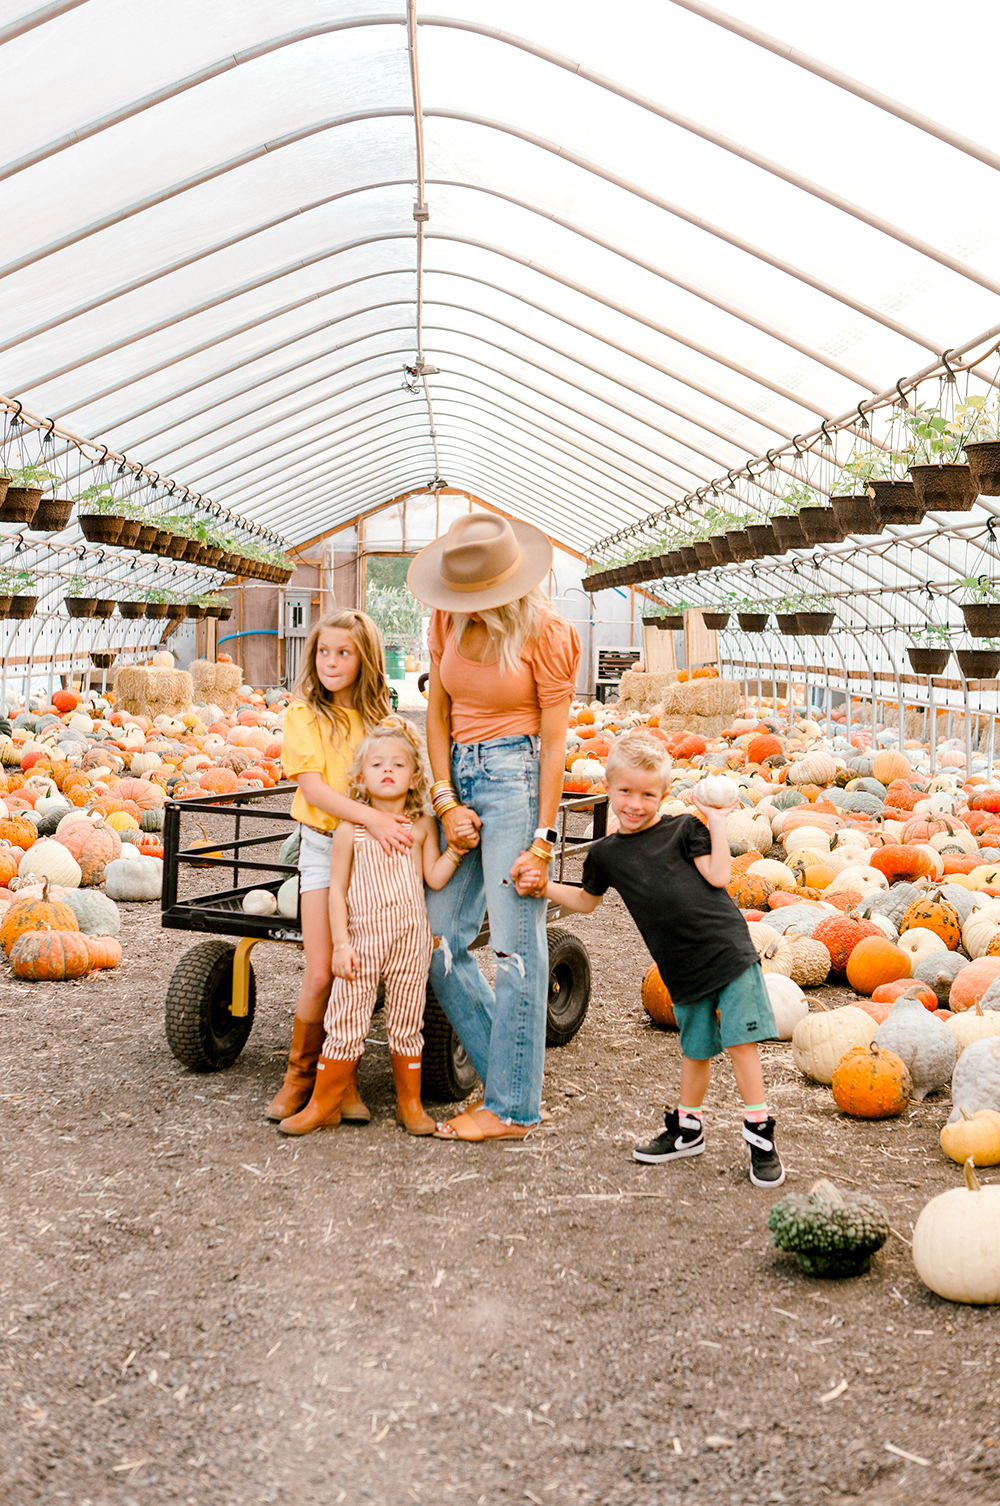 kailee wright Pumpkin patch